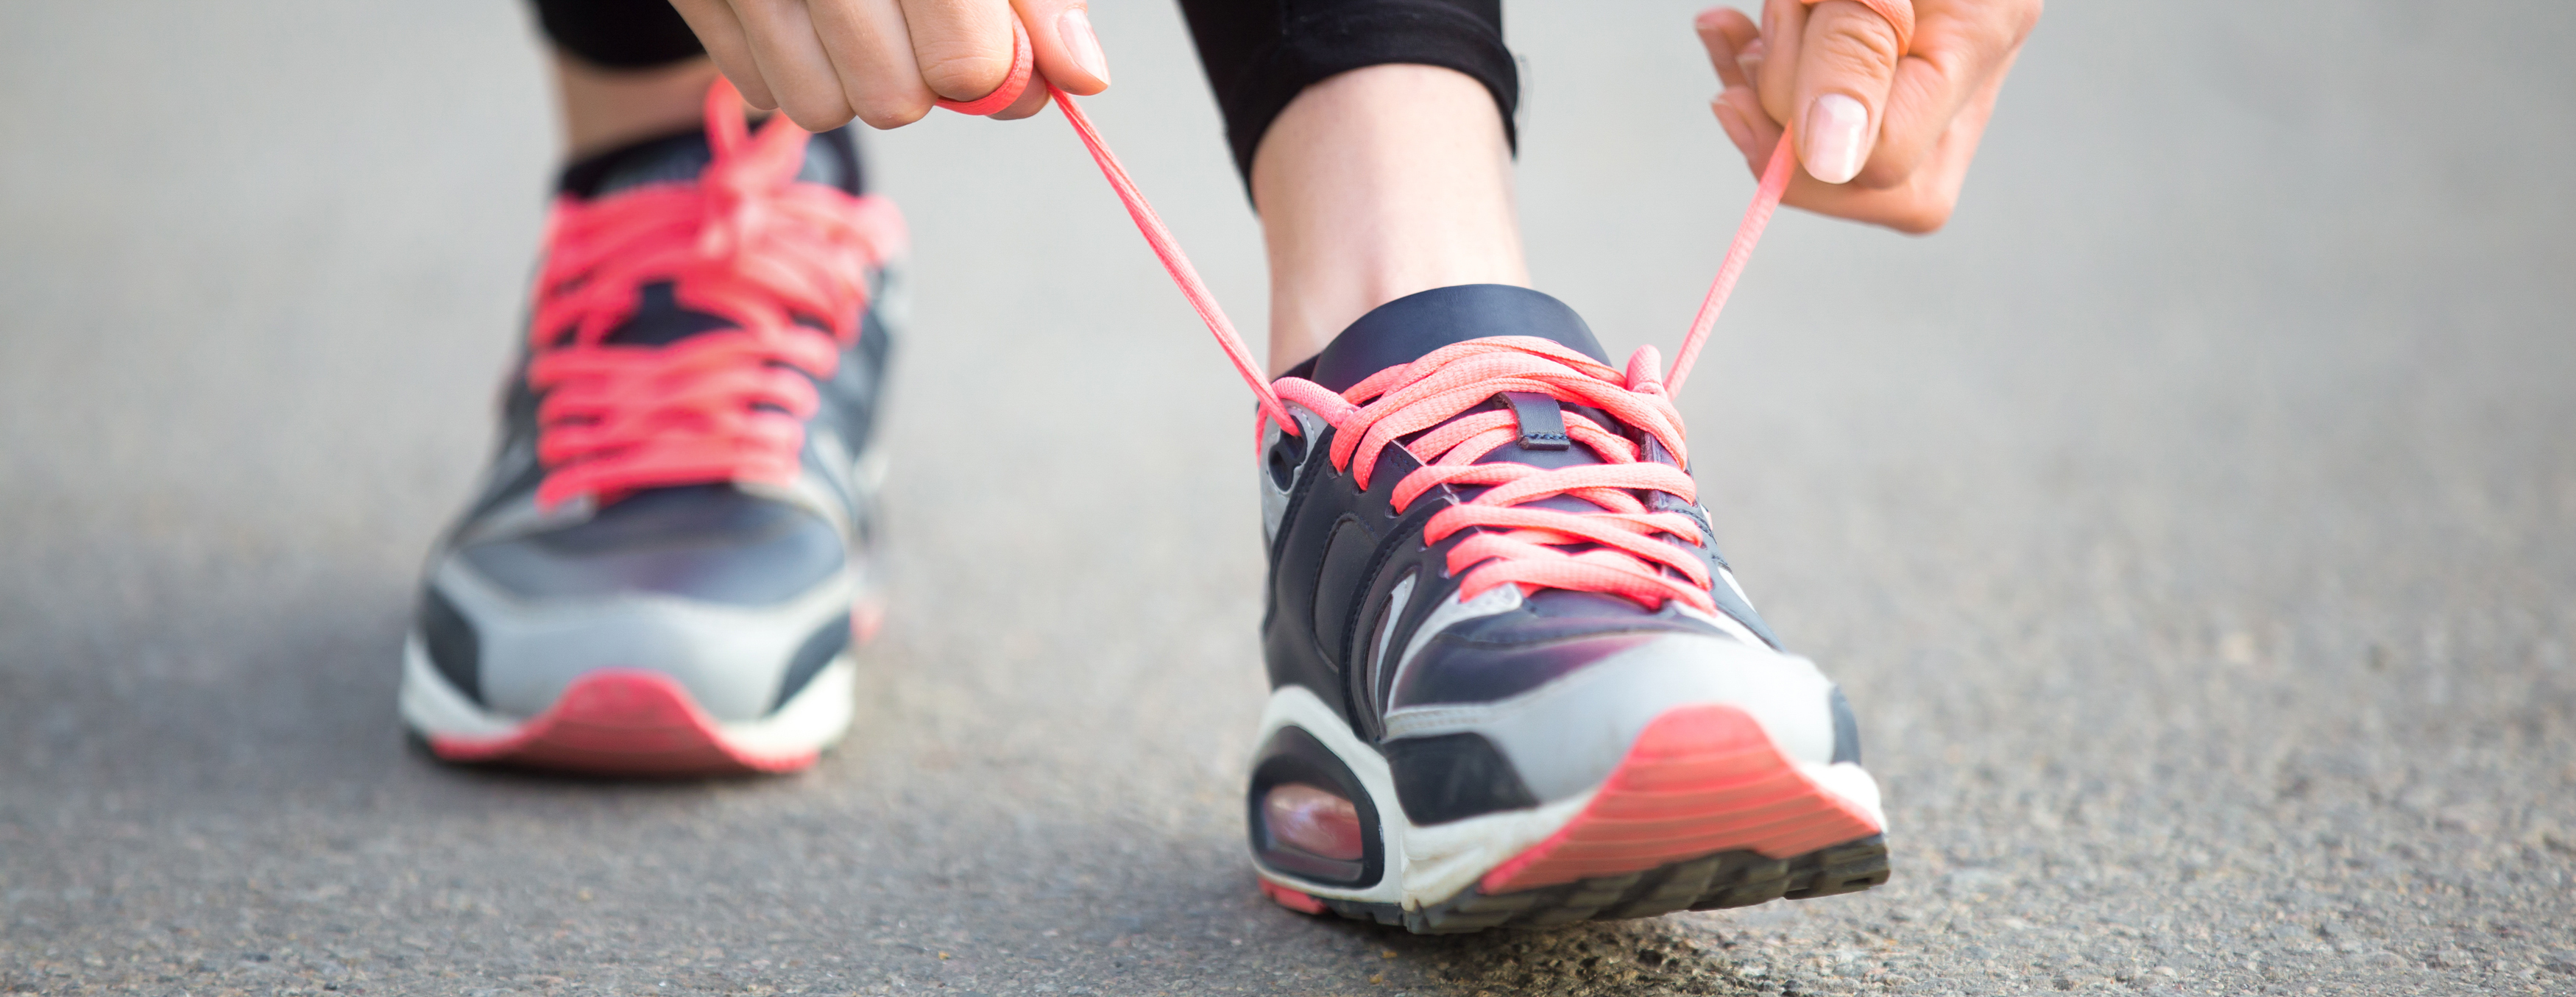 Different Ways to Tie Shoes for Running 